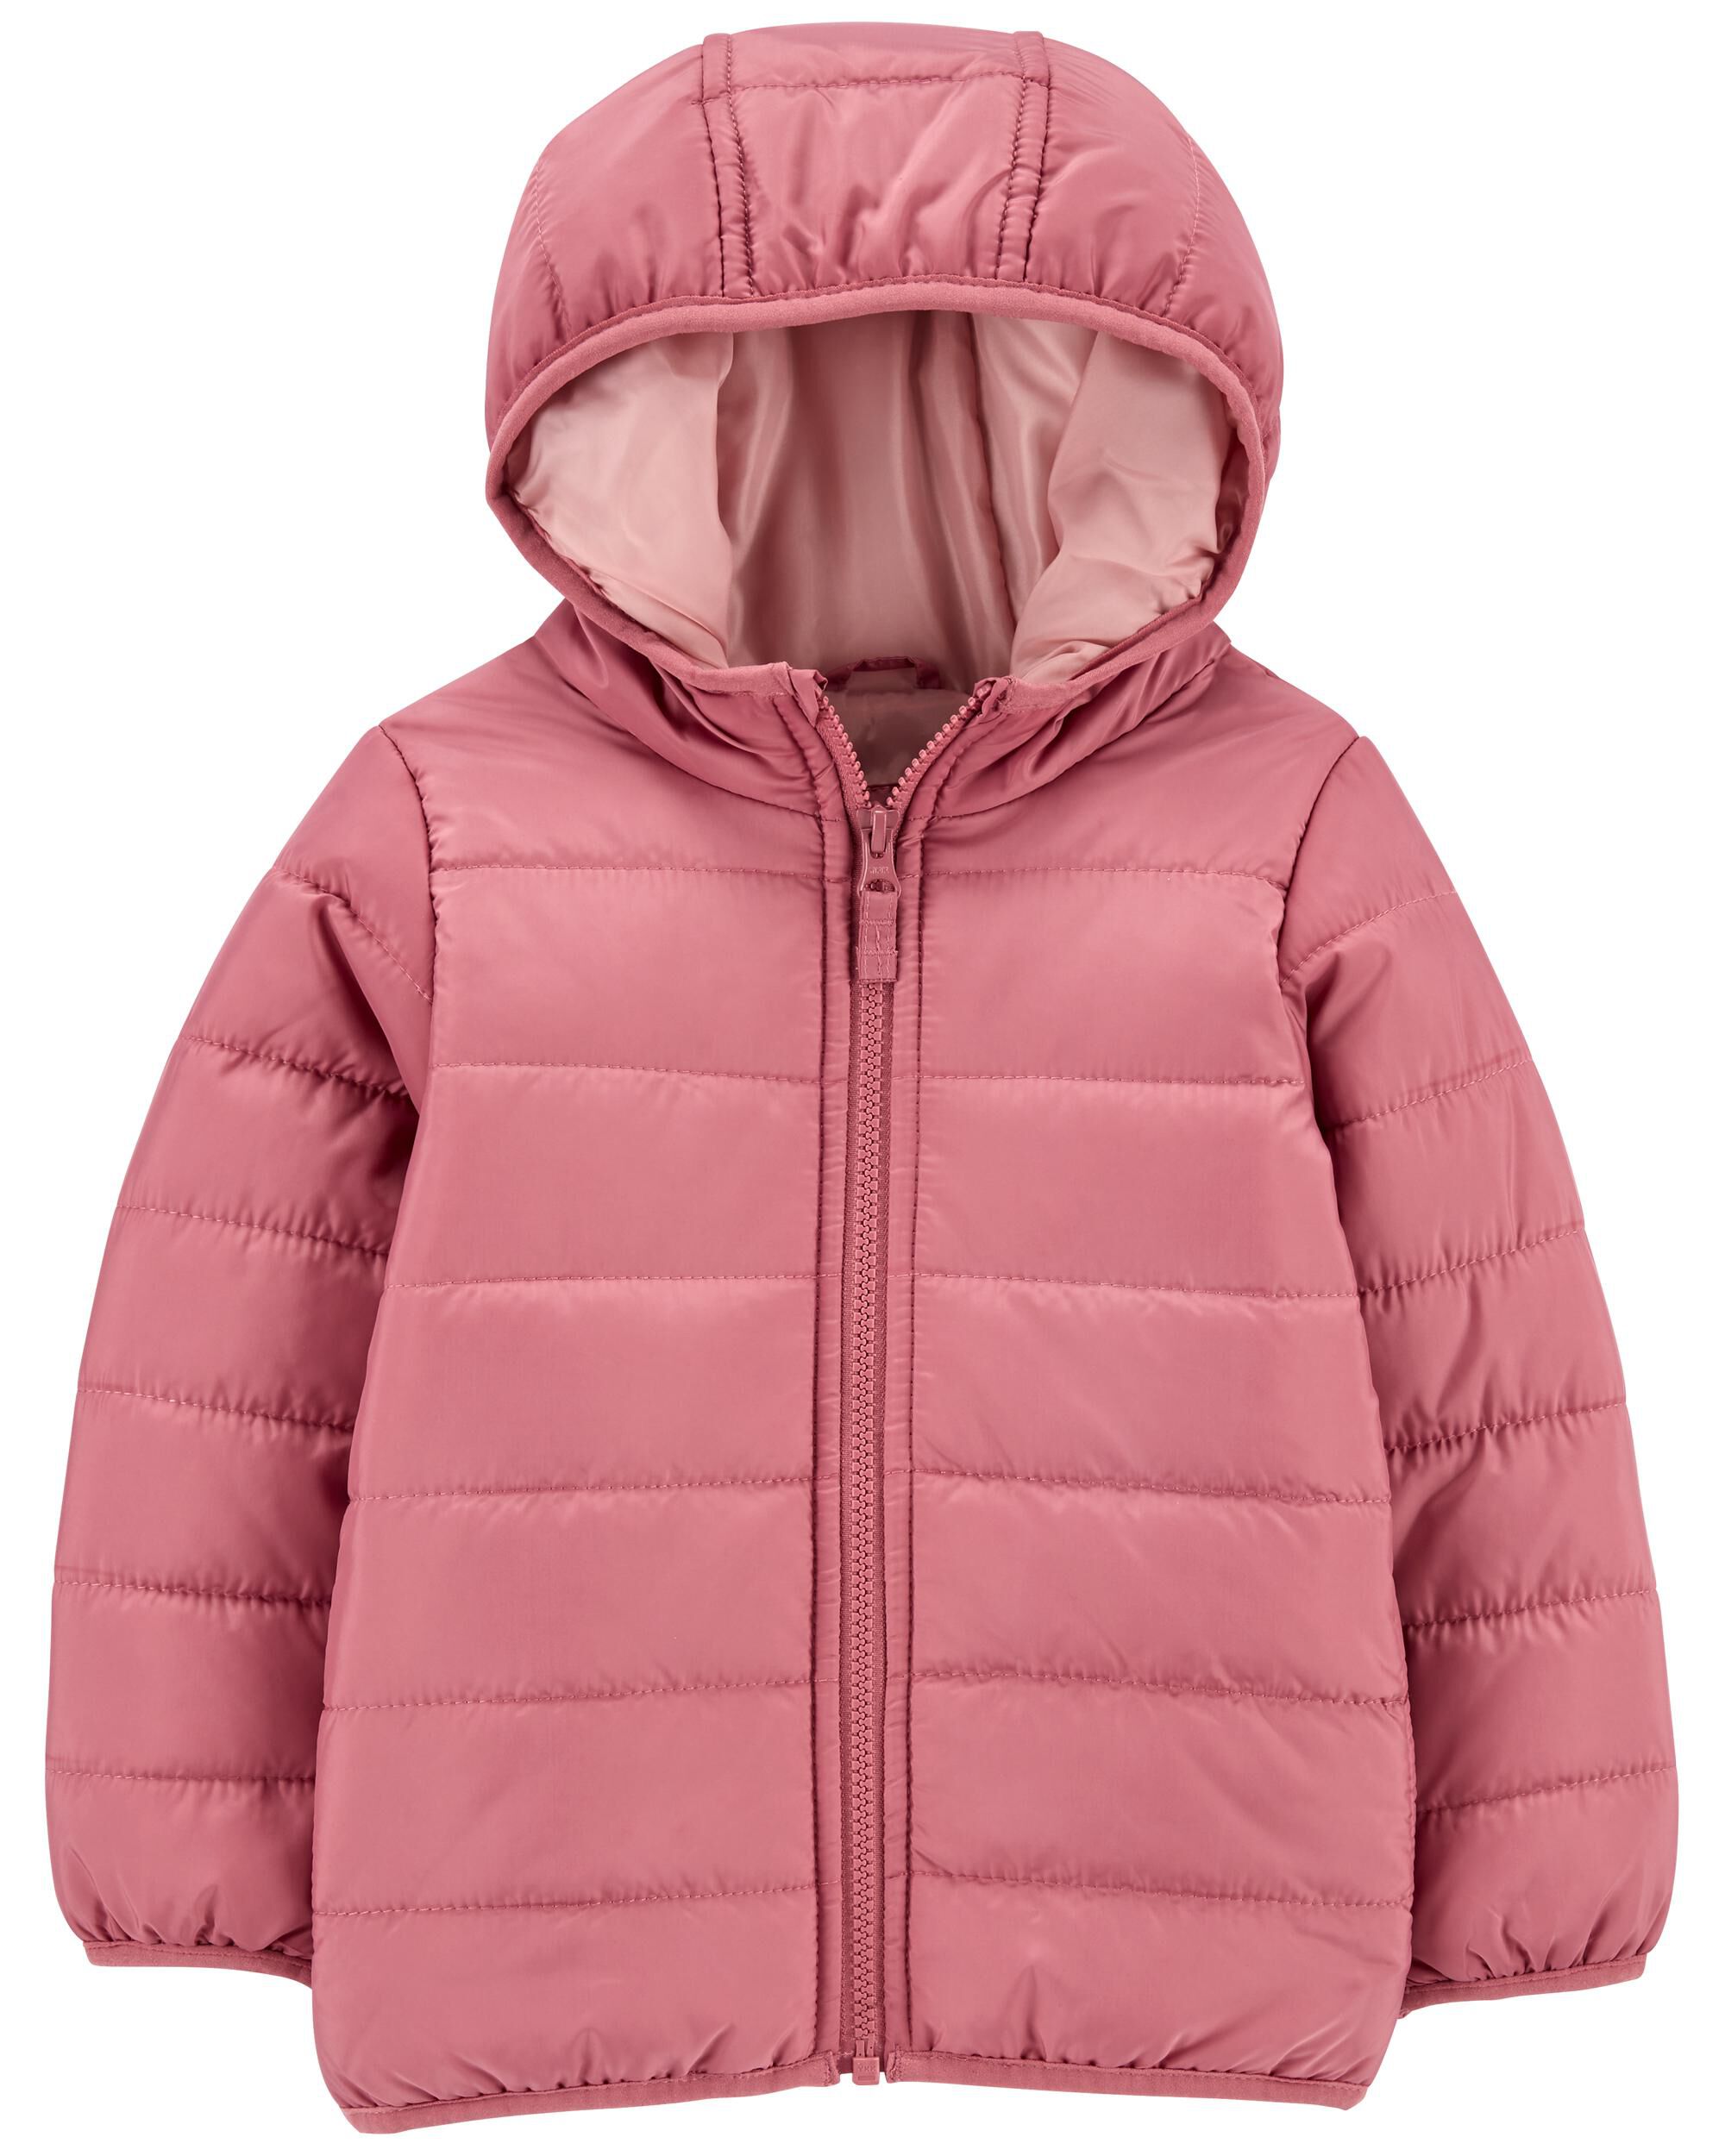 Toddler Girl Jackets & Outerwear | Carter's | Free Shipping